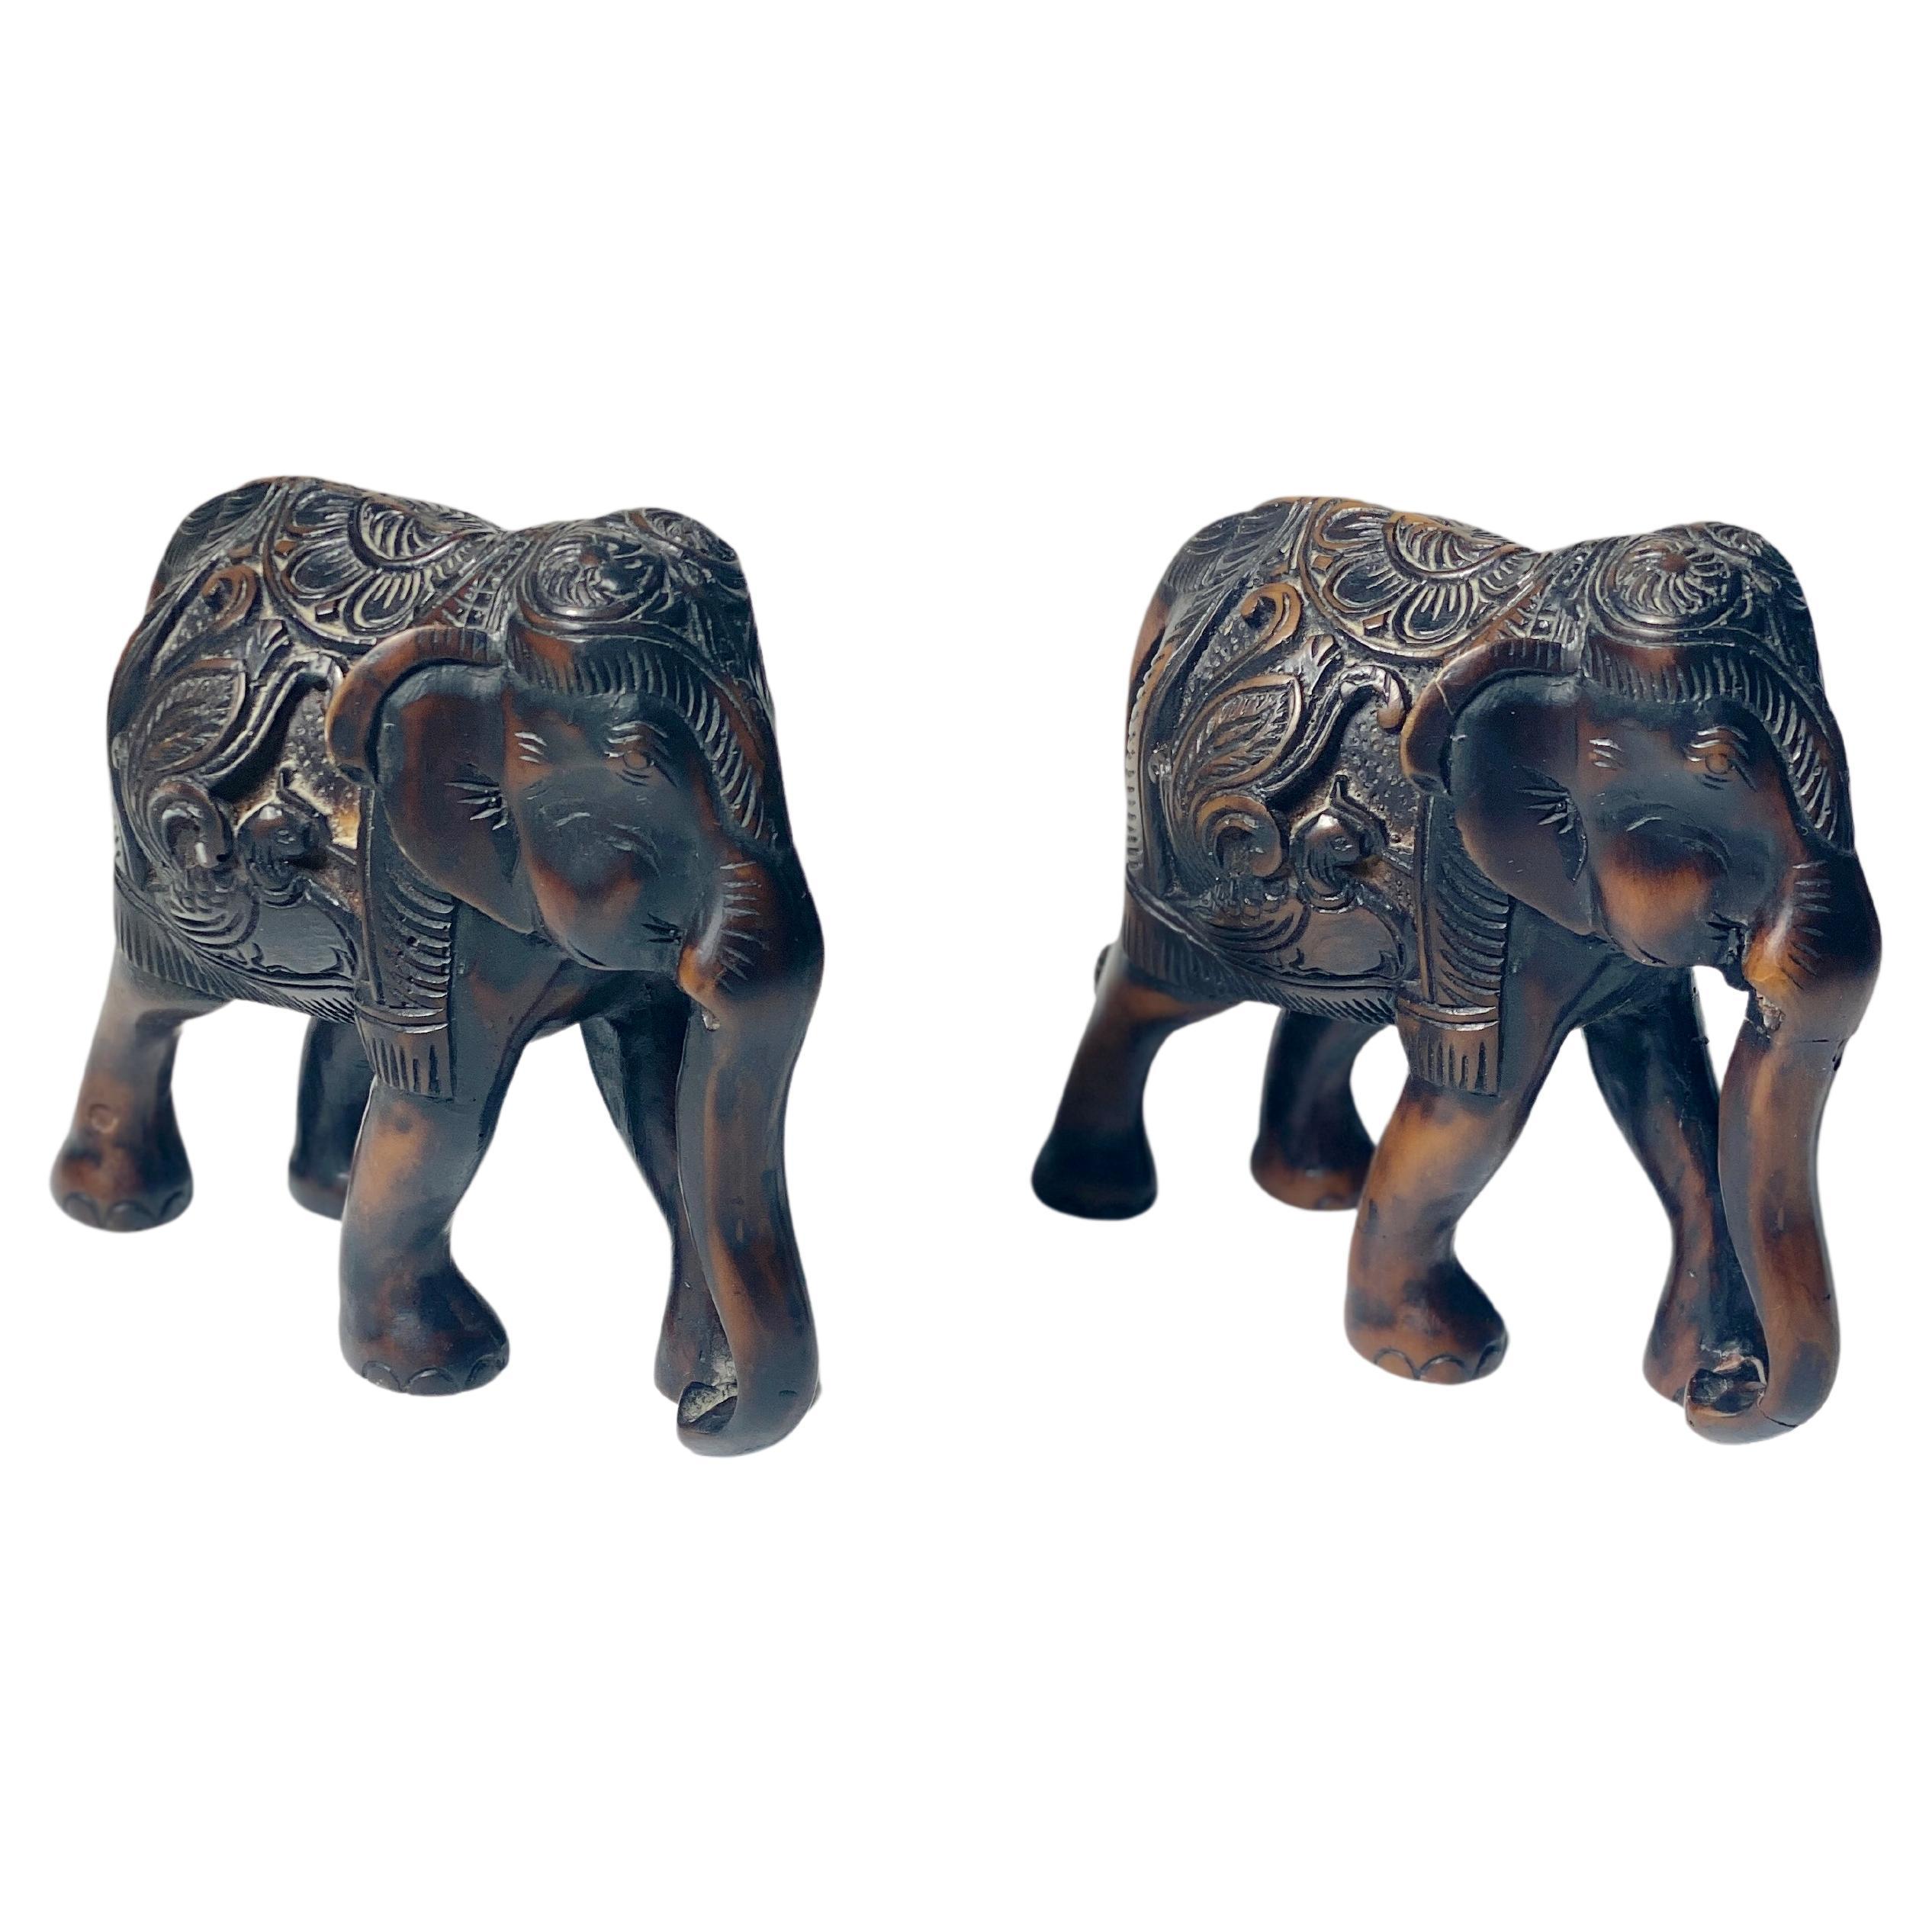 Pair of Elephants Sculptures, in Ceramic, Brown Color, Made in France circa 1970